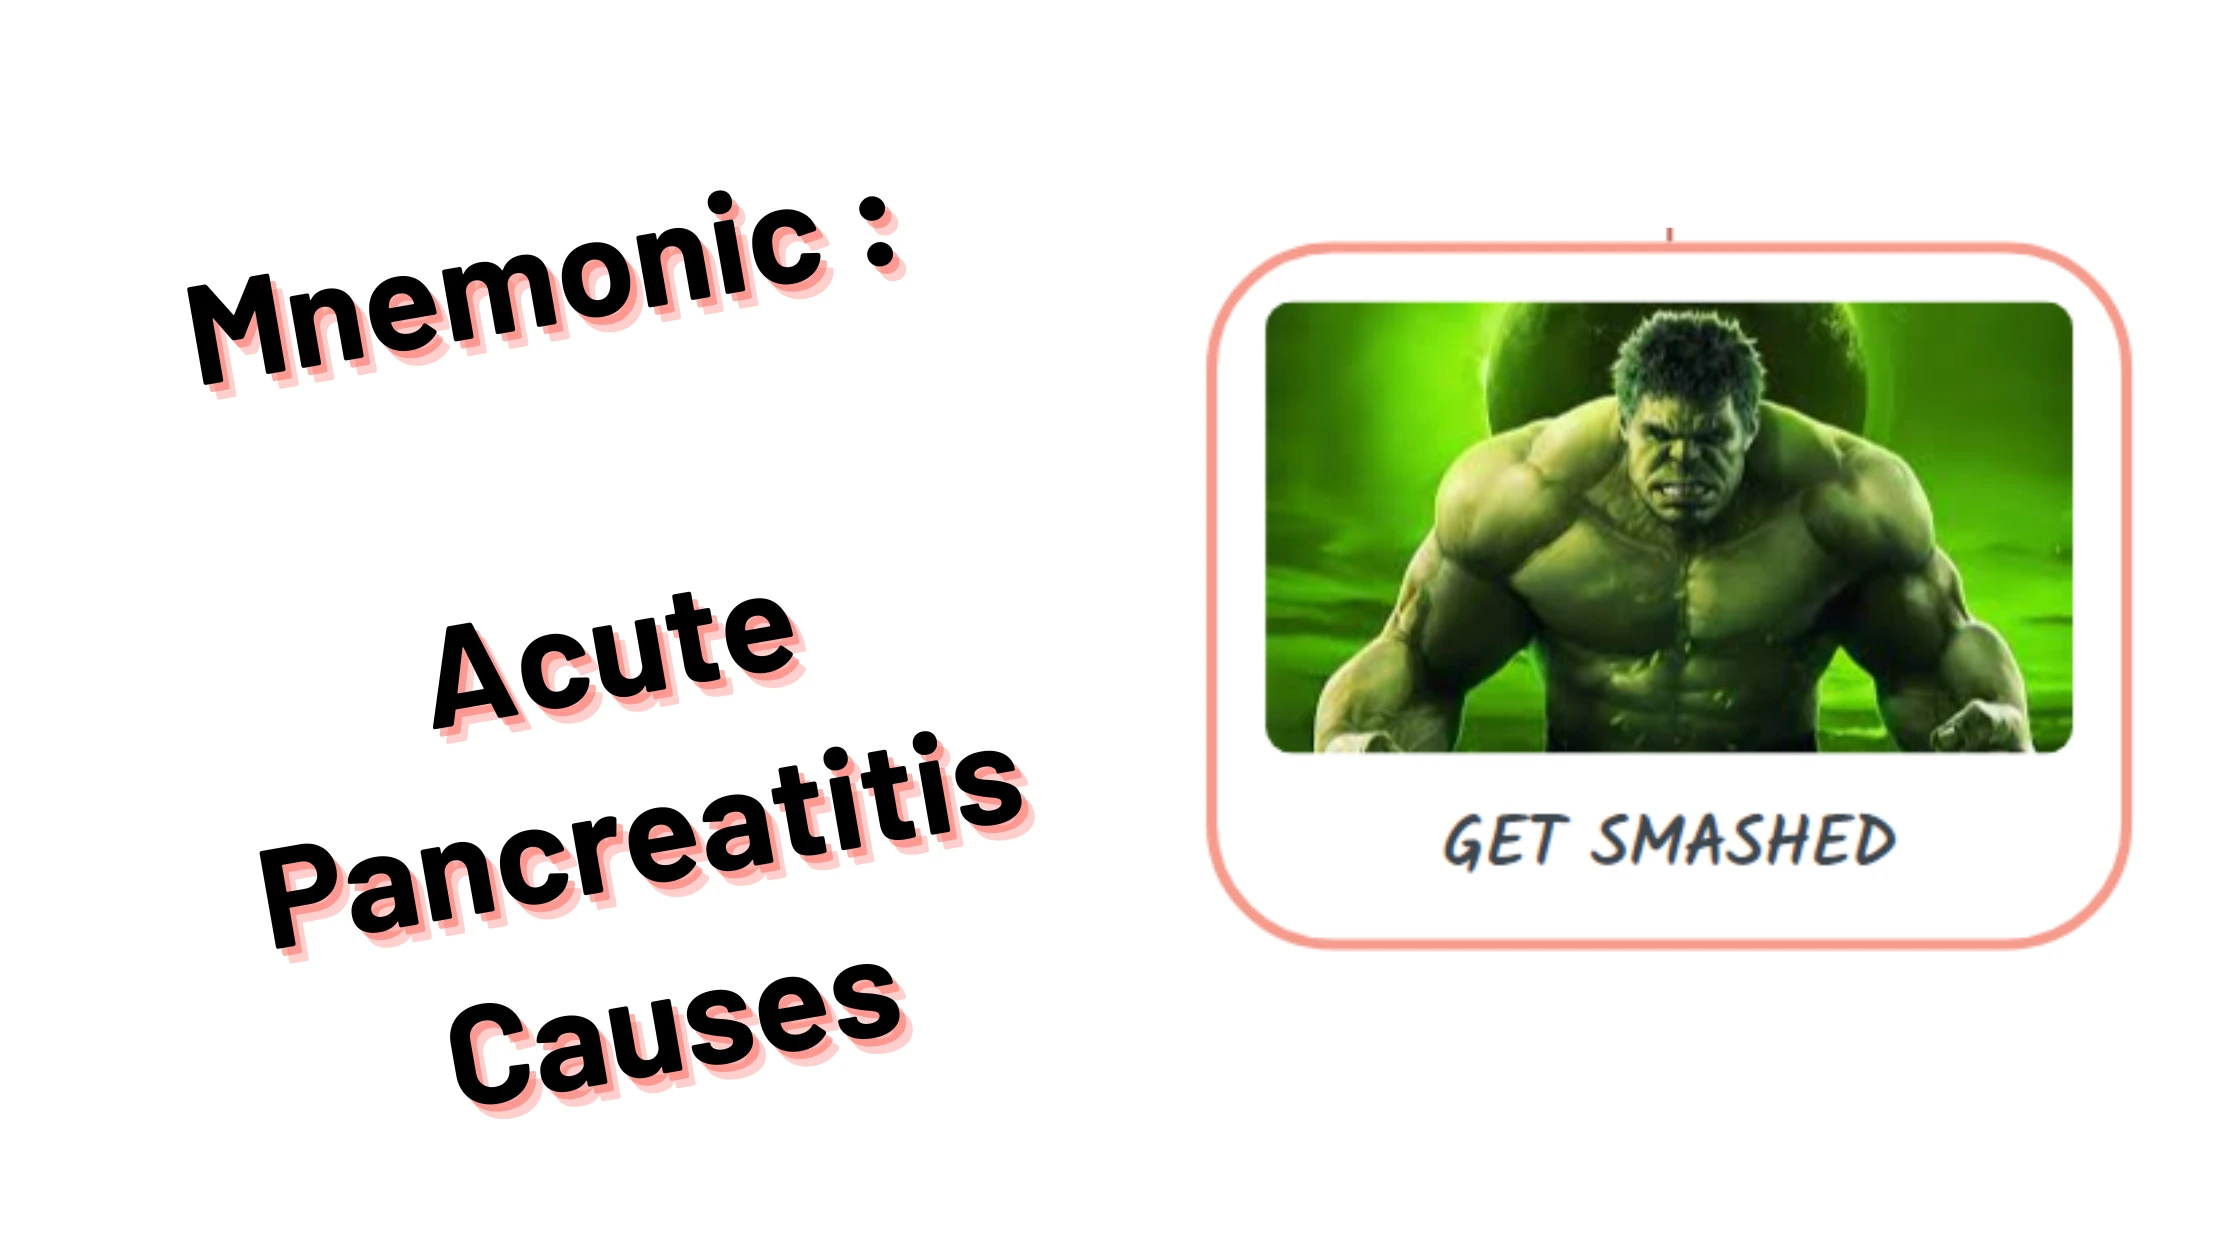 You are currently viewing [Very Cool] Mnemonic : Acute Pancreatitis Causes